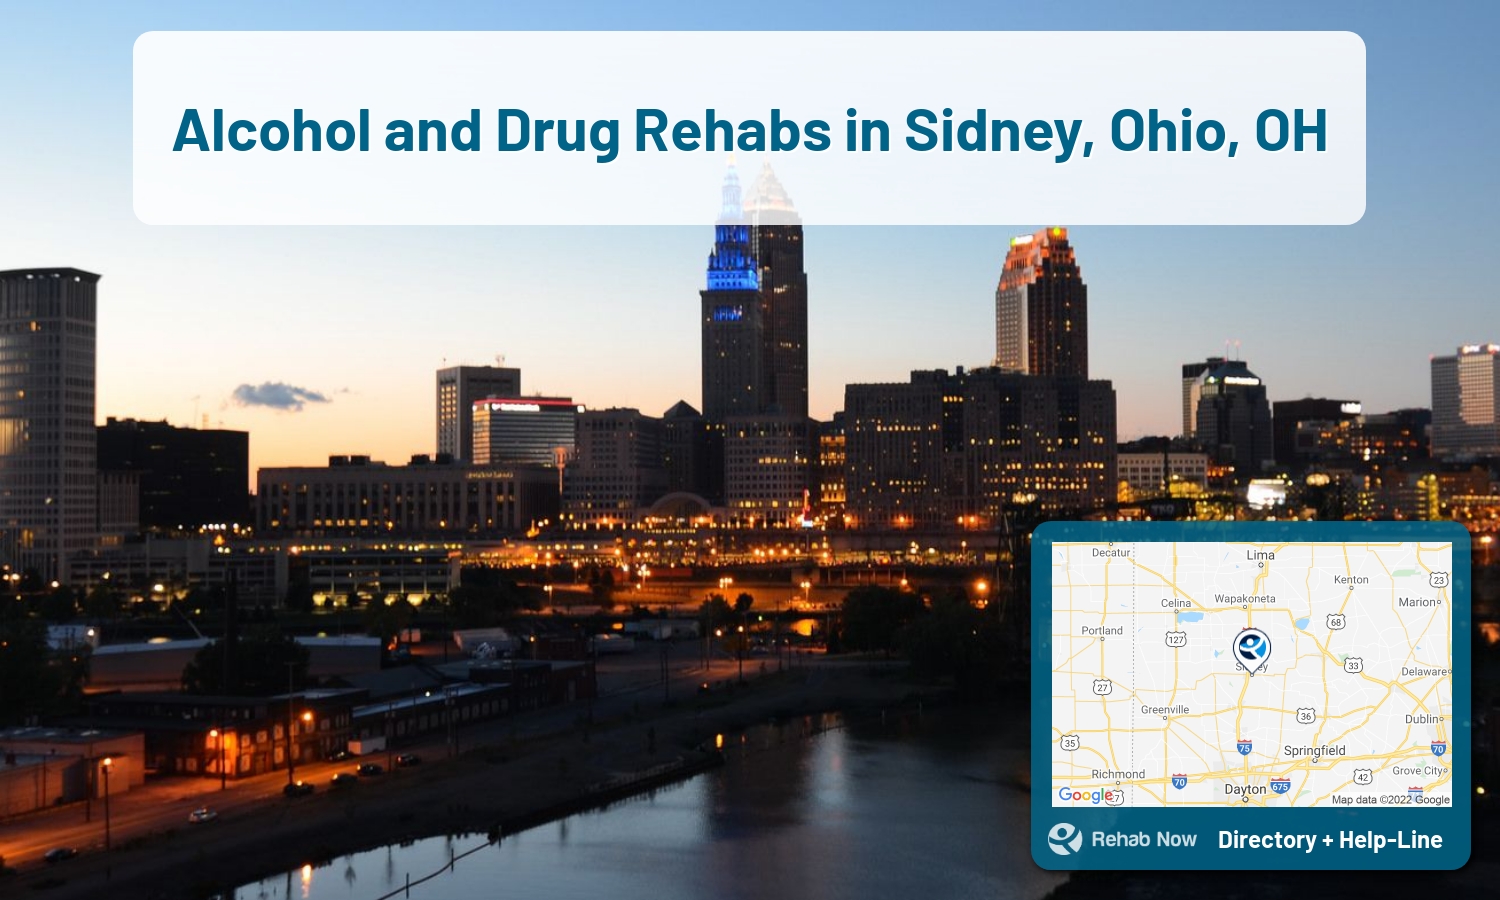 List of alcohol and drug treatment centers near you in Sidney, Ohio. Research certifications, programs, methods, pricing, and more.